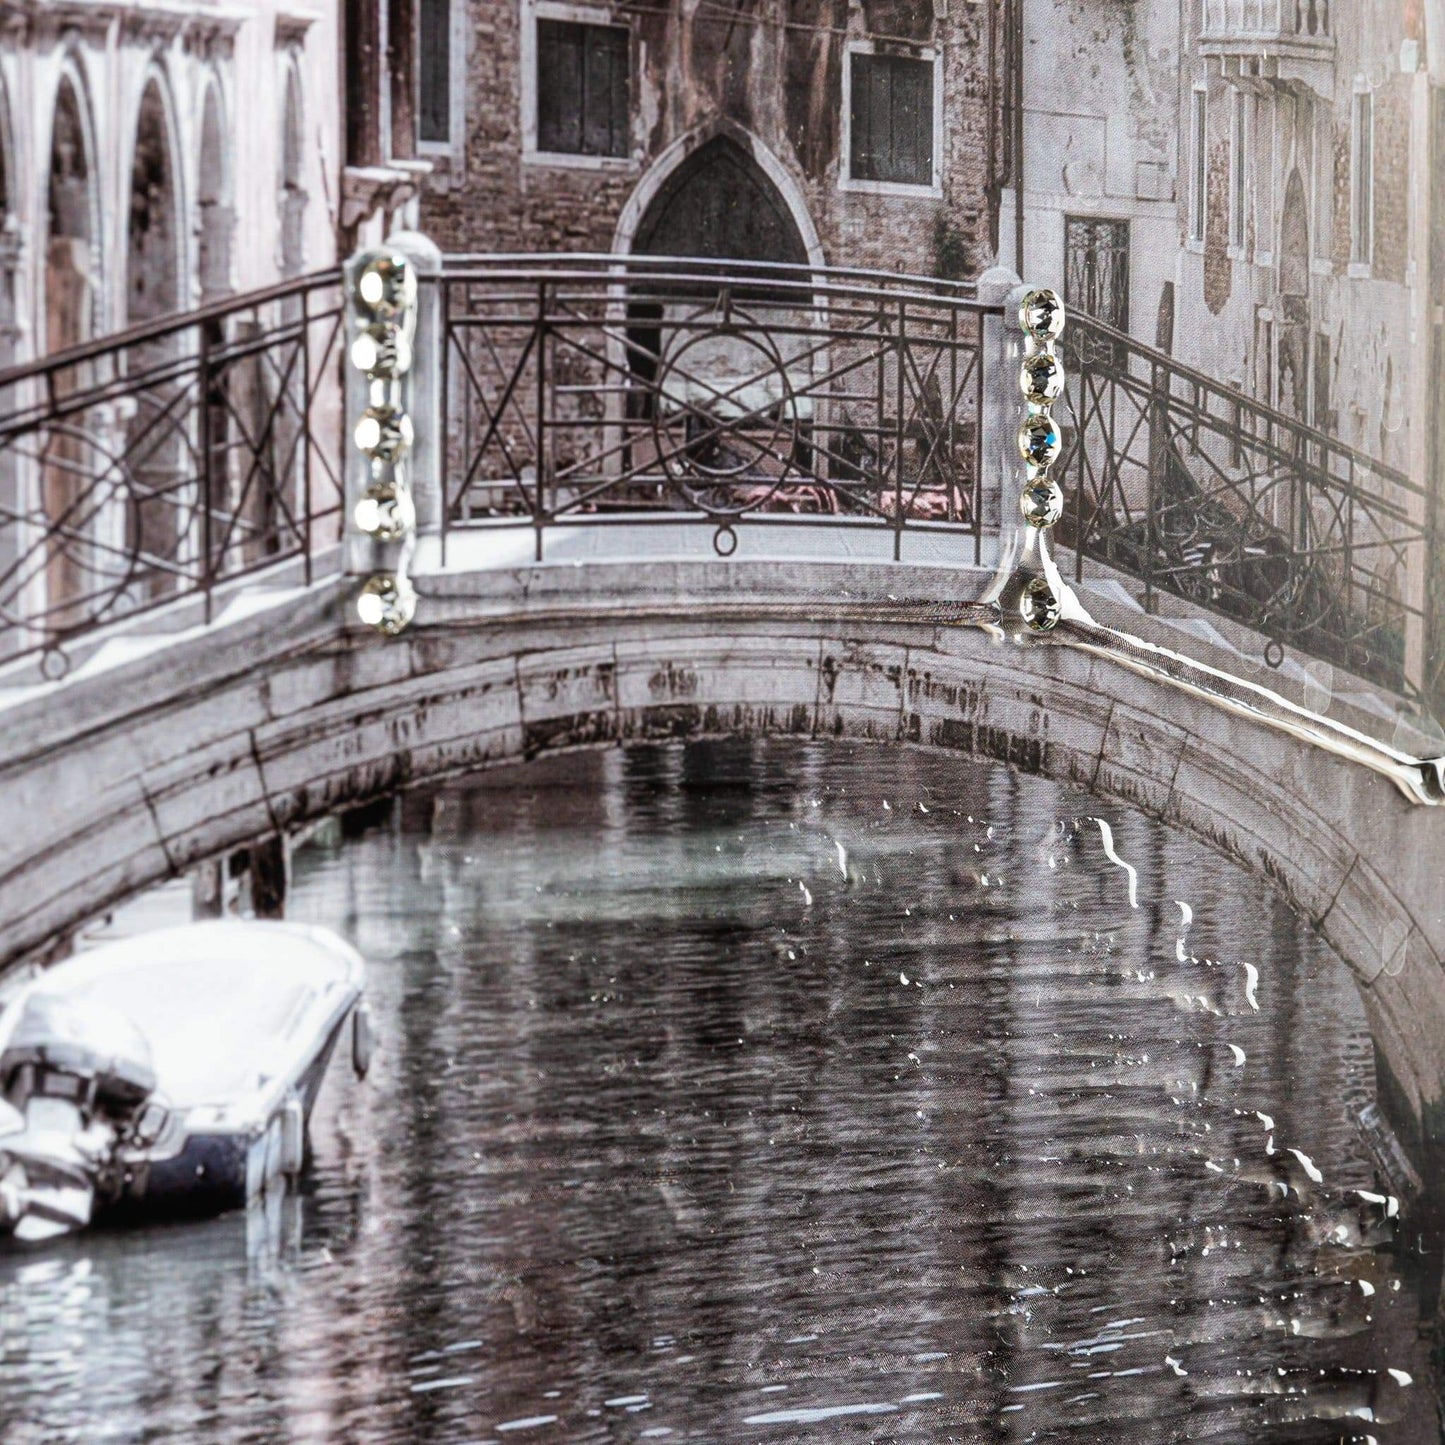 Pictures  -  Venice 2 - Silver Frame 75 X 75Cm  -  50140948